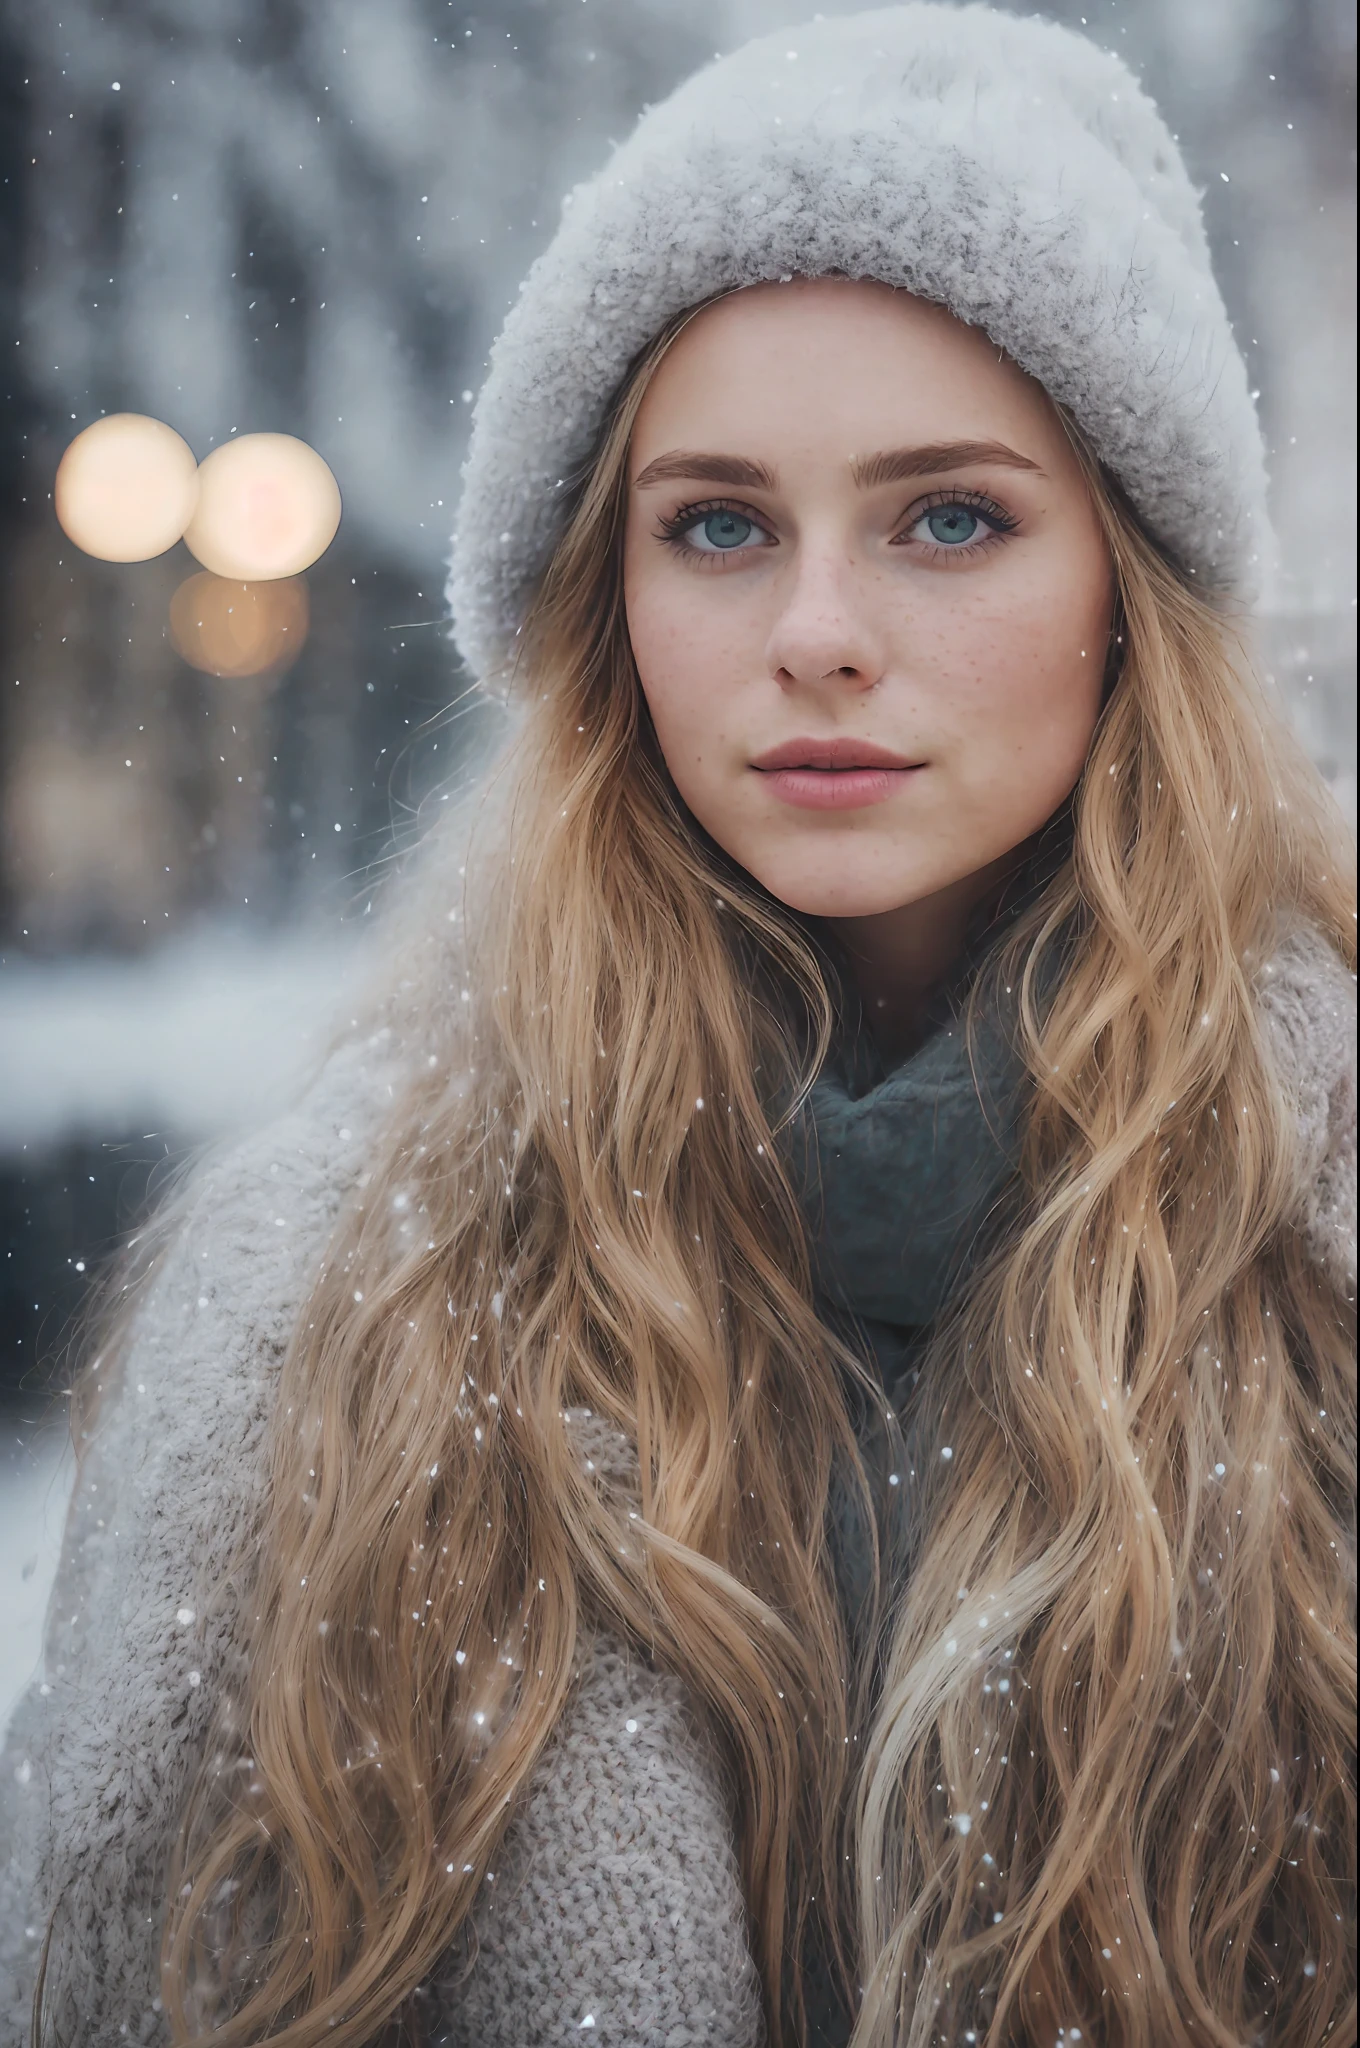 ProFessional portrait photograph oF a beautiFul Norwegian girl in winter clothes with long wavy blonde hair, 性感诱人的外表, (Freckles), beautiFul symmetrical Face, 可爱自然妆容, wearing 优雅的 and warm winter clothes, ((standing outside on the snowy street oF the city)) , 令人惊叹的现代城市环境, 超现实, 概念艺术, 优雅的, 非常详细,  错综复杂, sharp Focus, depth oF Field, F/1. 8, 85毫米, 中等平面, 中等平面, (((proFessionally graduated color))), soFt and bright diFFused light, (体积雾), Instagram 趋势, HDR 4K, 8千,